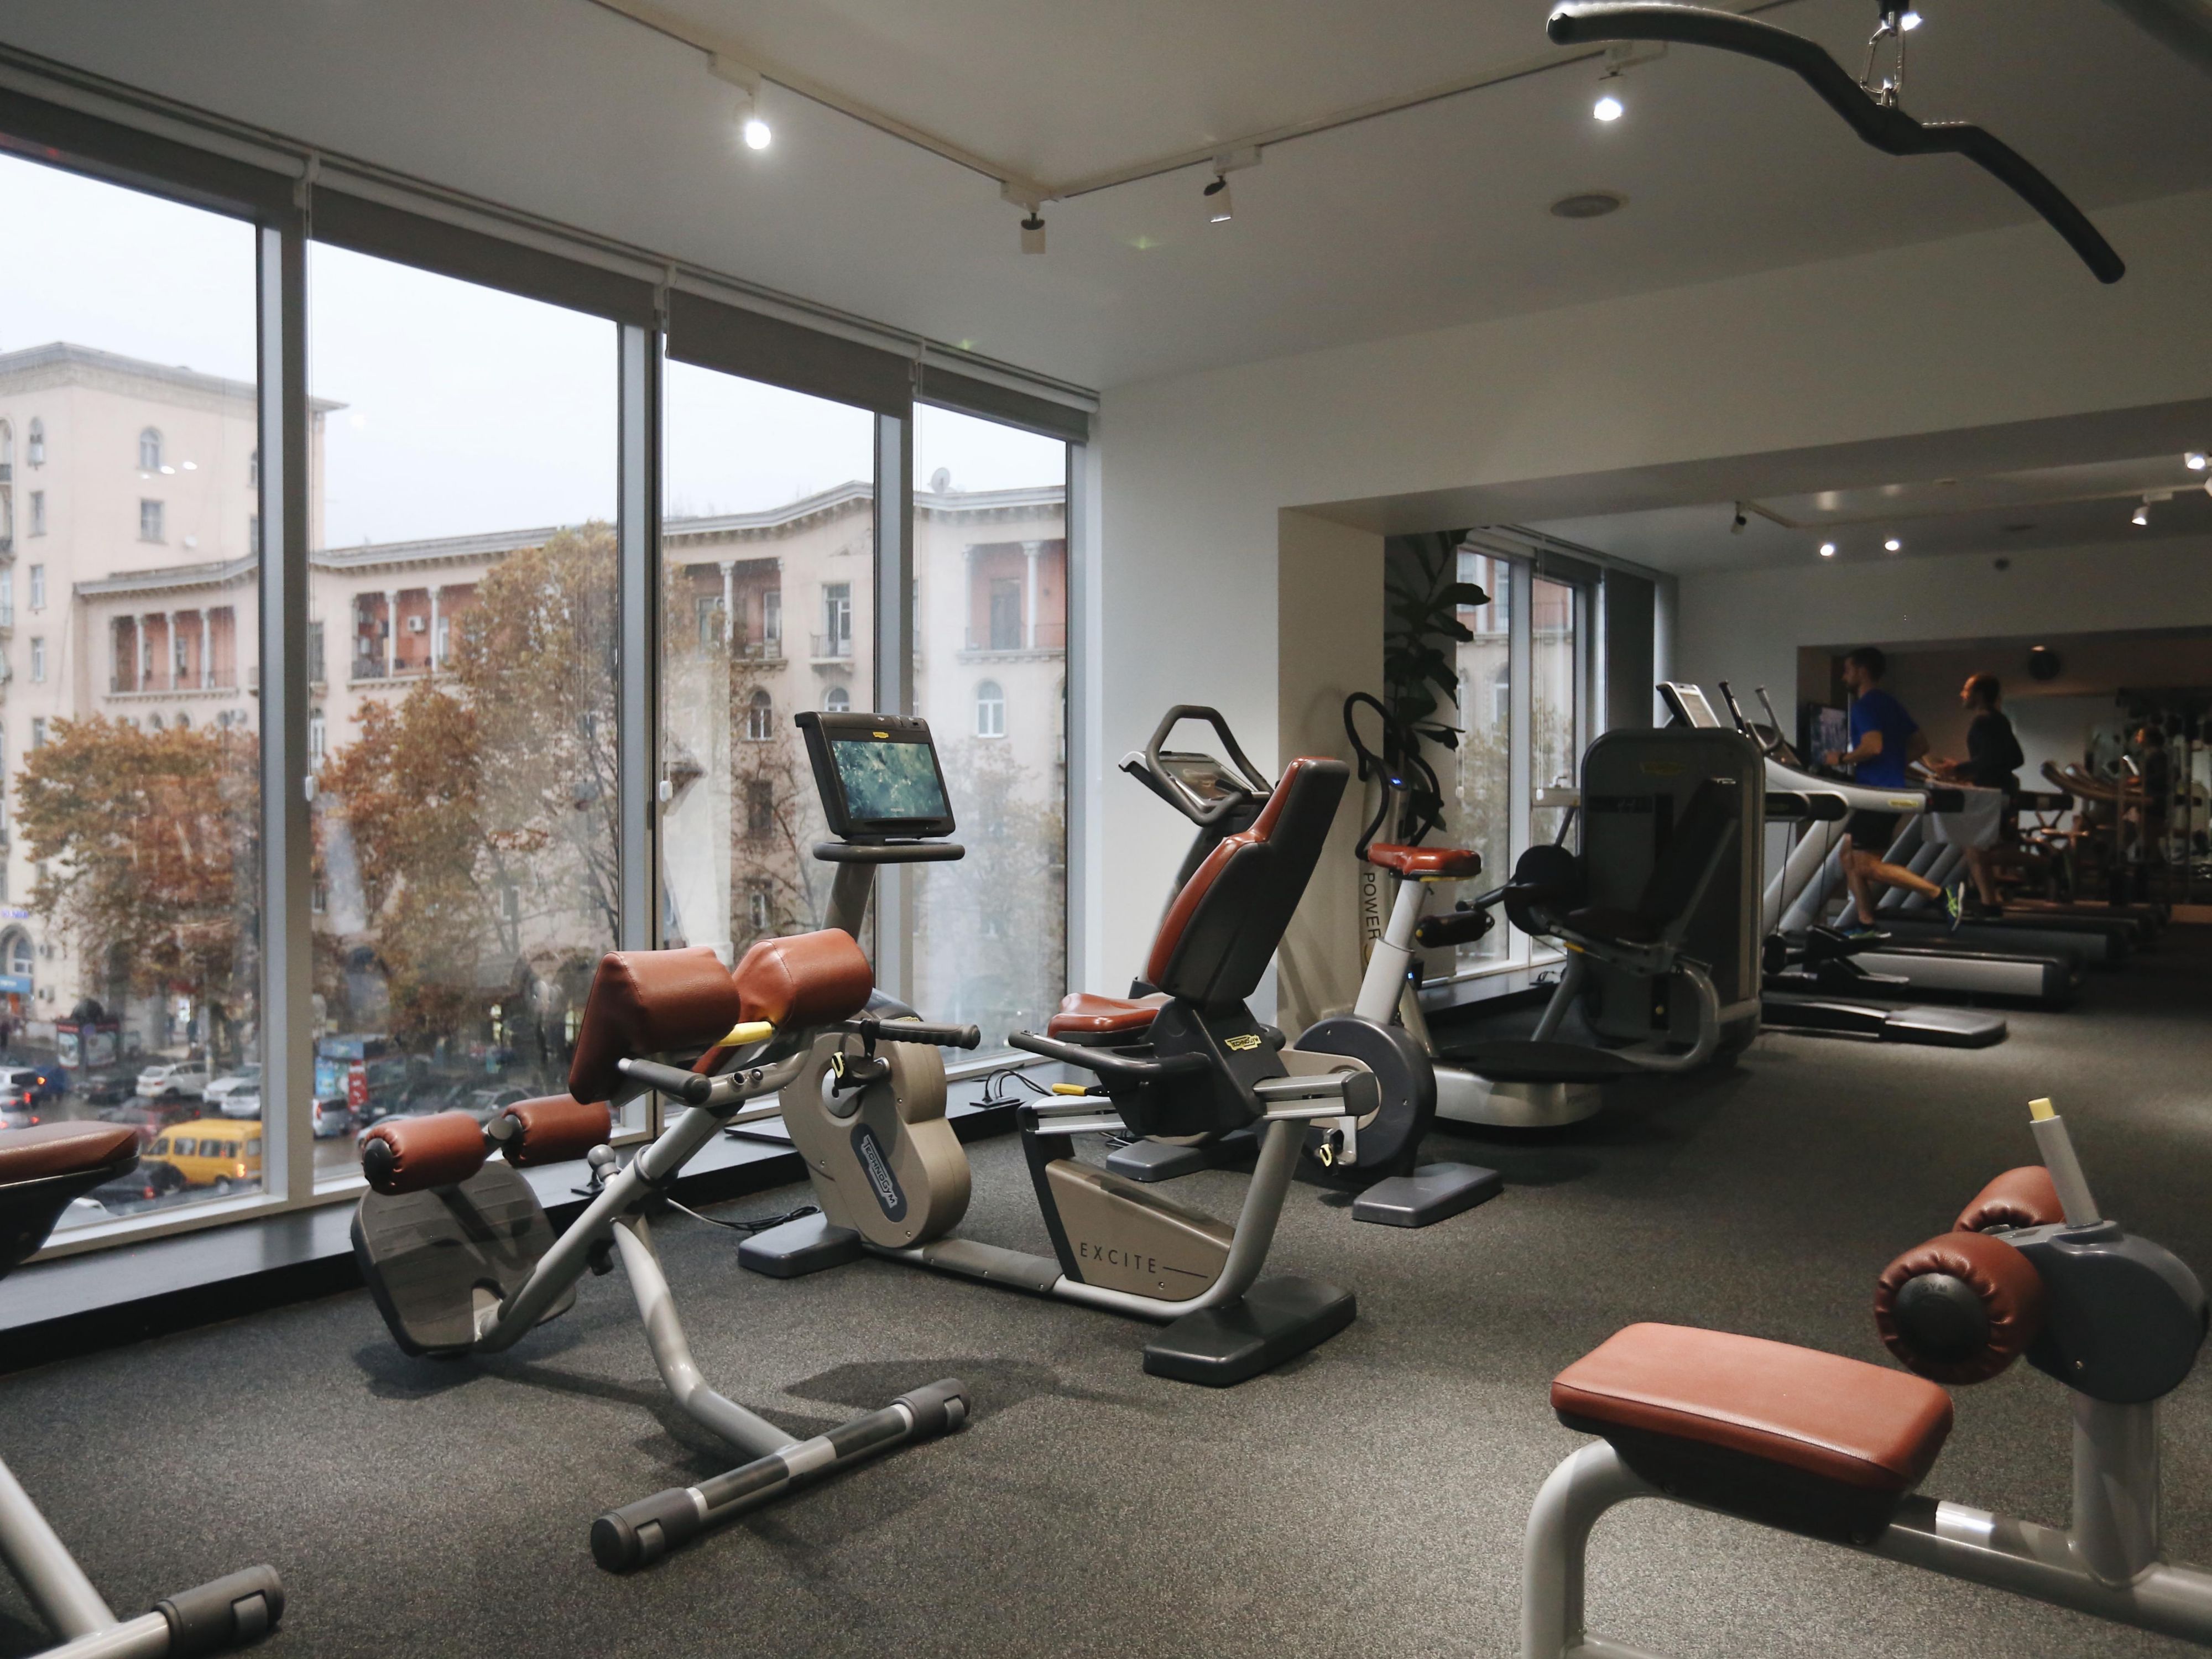  In addition to a convenient location and a clean, well-maintained facility, the Holiday Inn Tbilisi gym is equipped with Technogym machines.